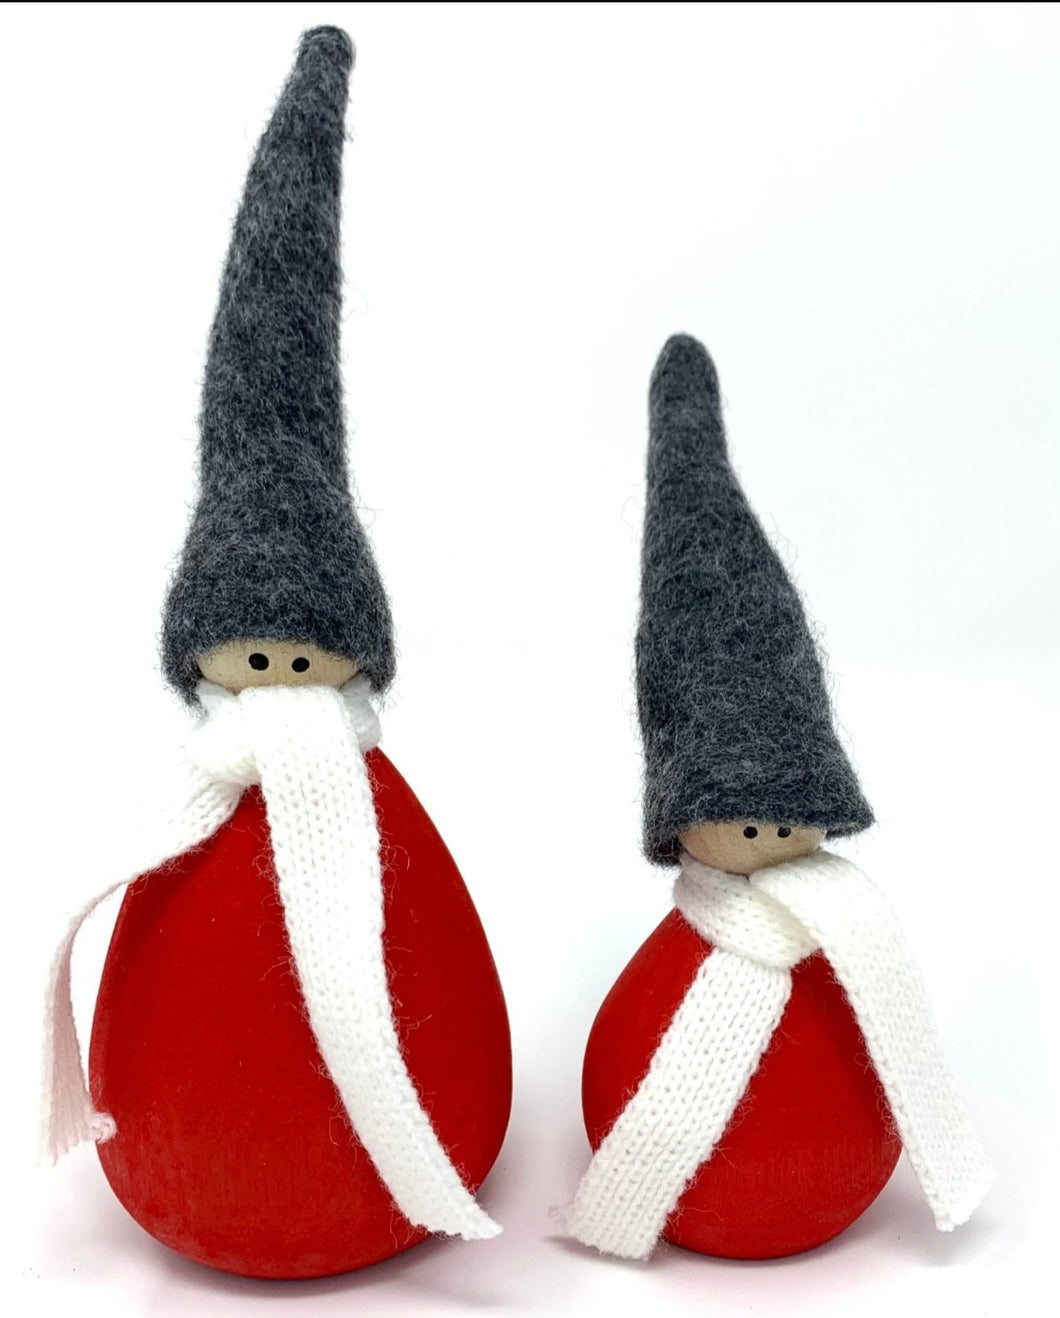 Tomte with Grey Hat